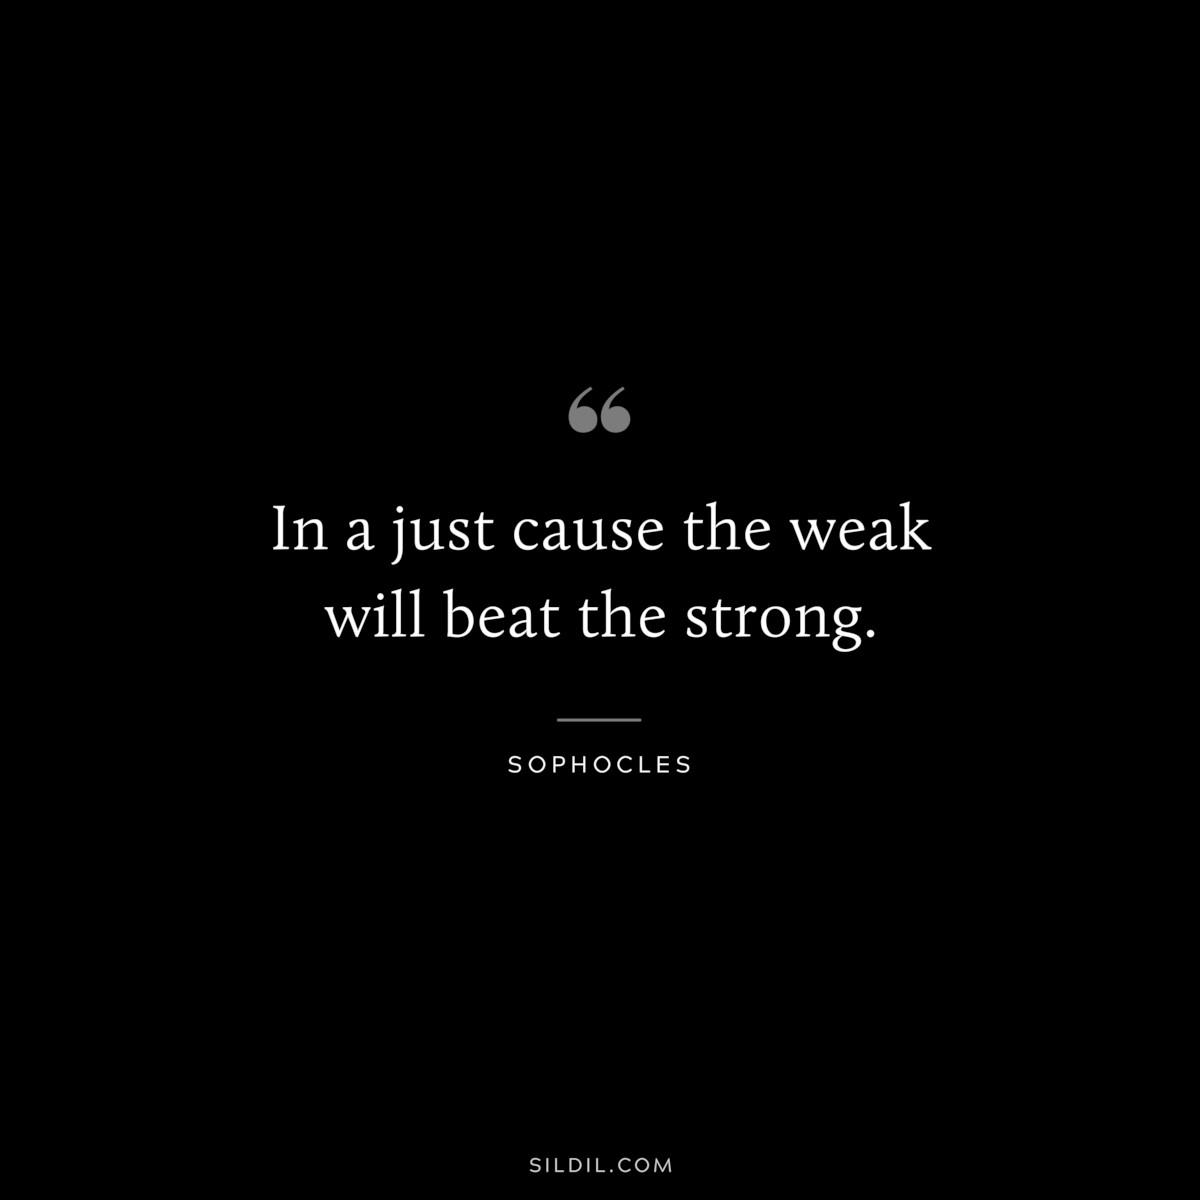 In a just cause the weak will beat the strong. ― Sophocles